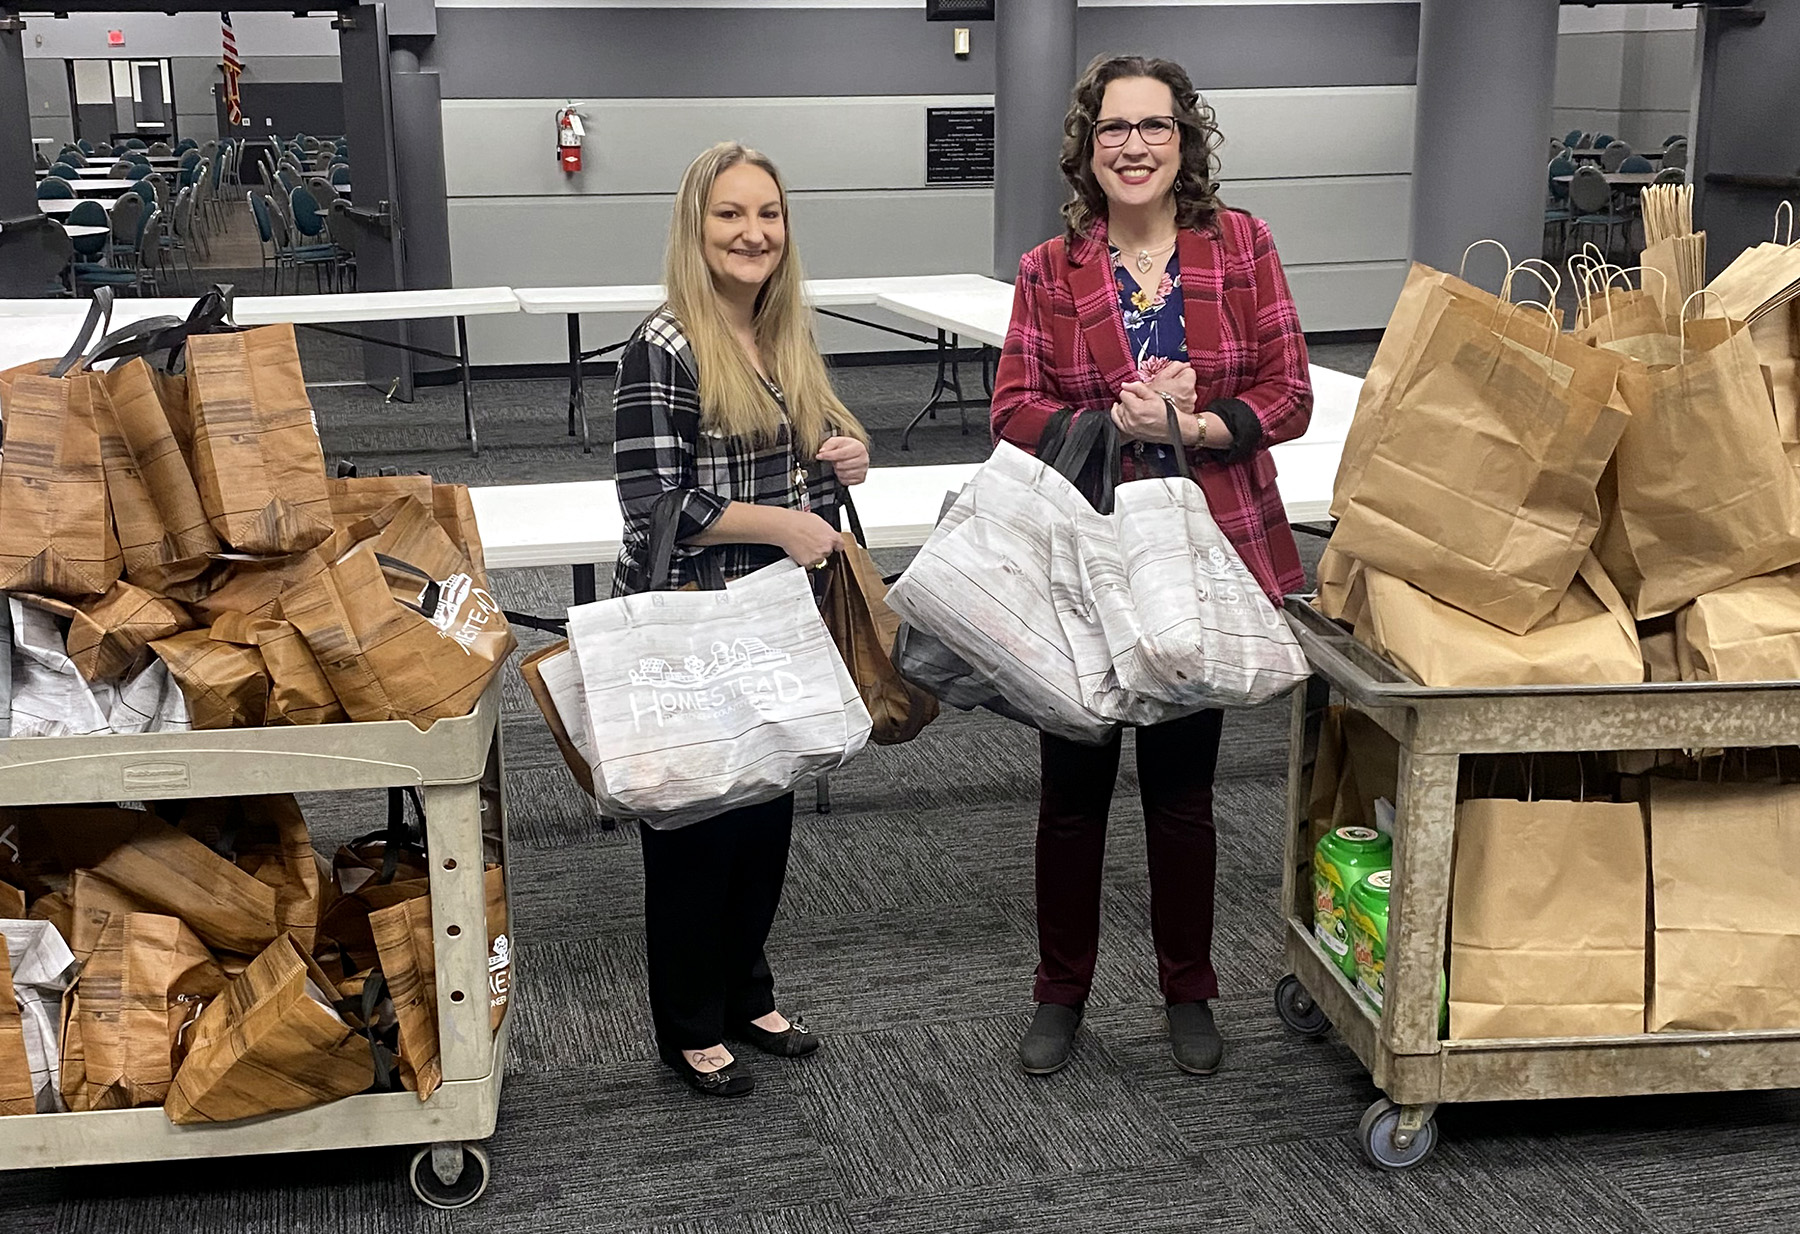 Wharton County Junior College provides food and toiletries to students through the Pioneer Homestead pantry. Pictured gathering donations for the pantry donated by the Wharton Rotary Club are, from left, WCJC Counselor Shannon Glardon and WCJC's Director of Counseling and Disability Services Amber Barbee.